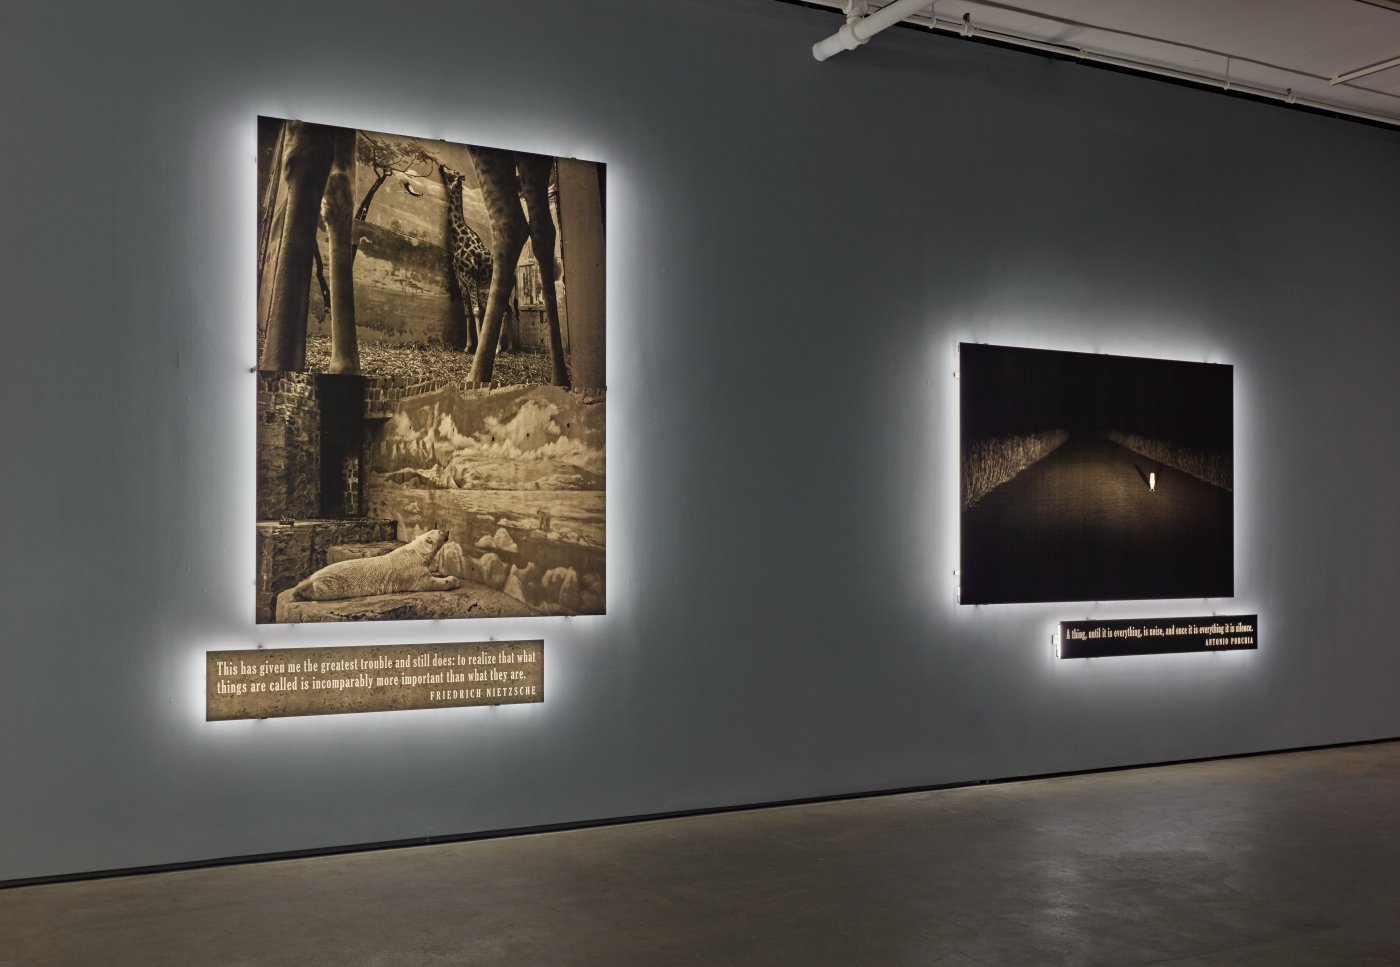 Installation image for Joseph Kosuth: 'Existential Time', at Sean Kelly Gallery